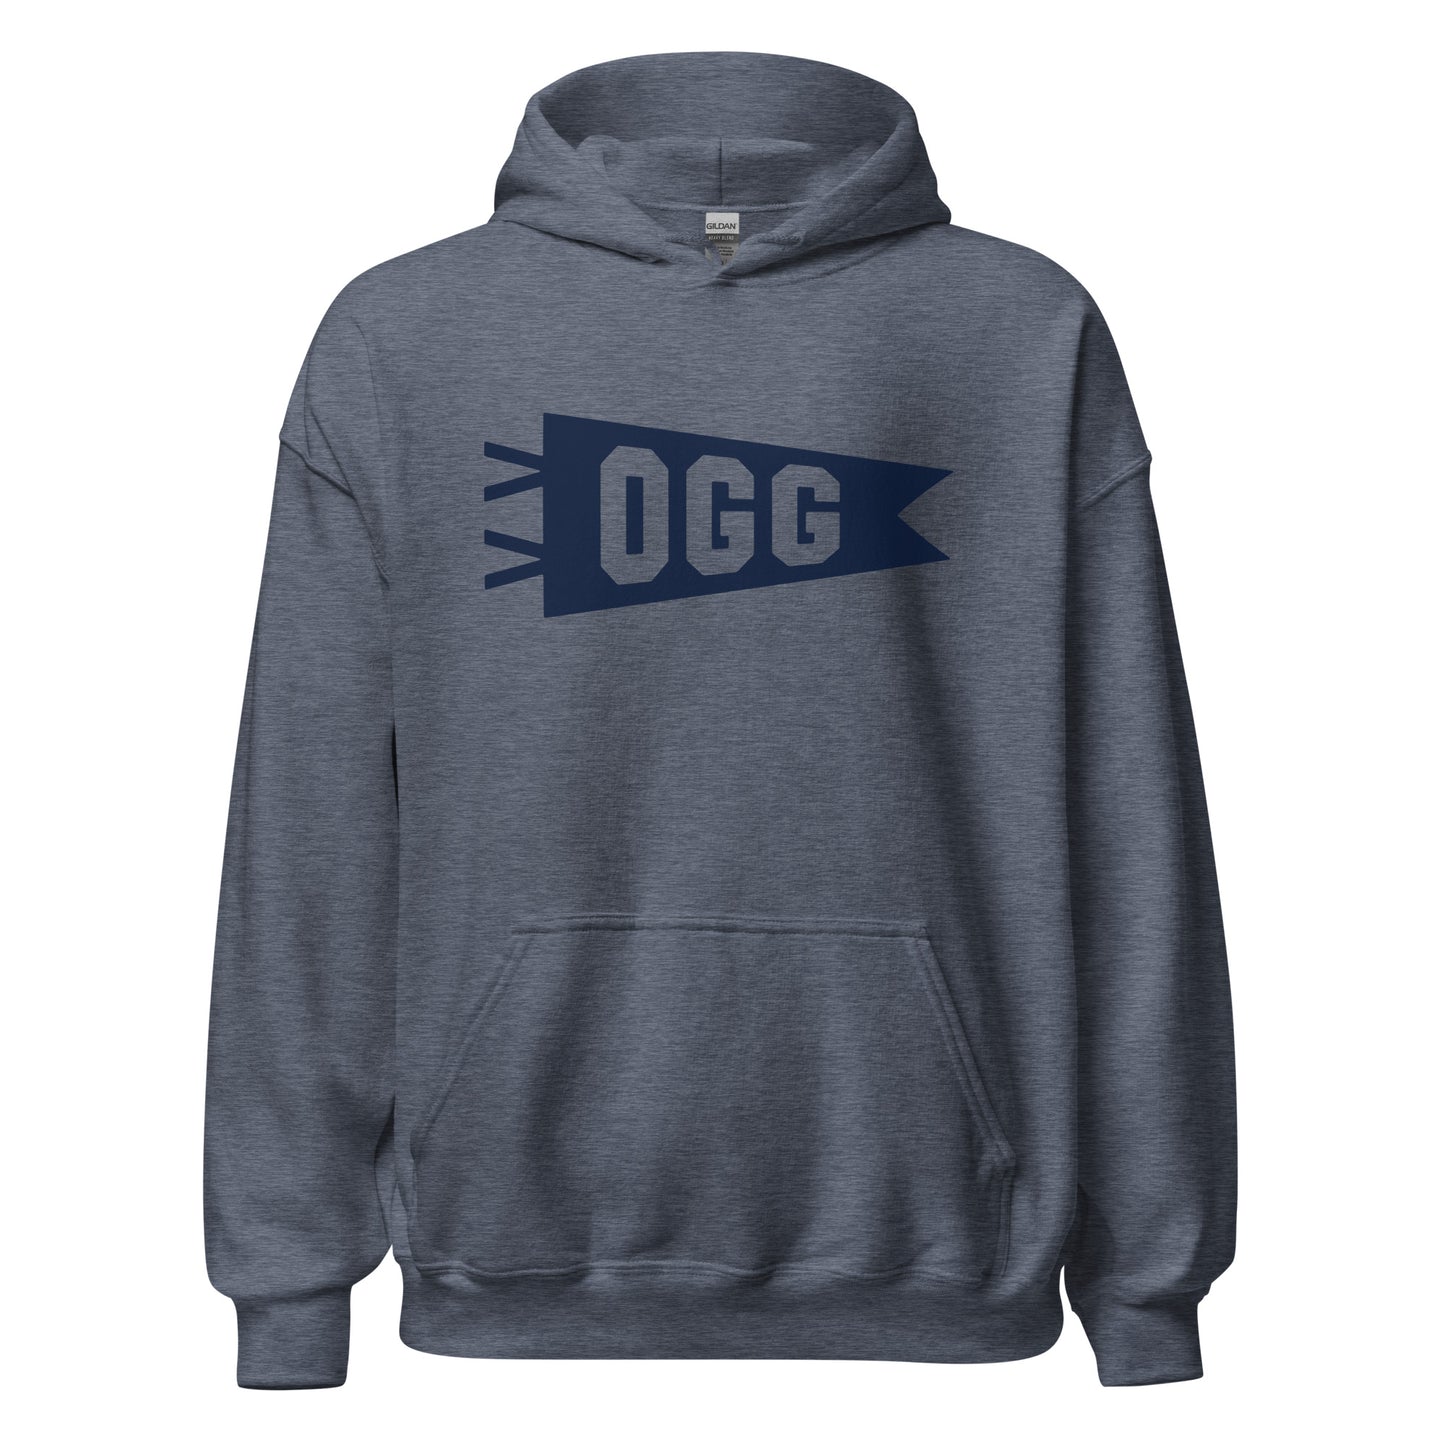 Airport Code Unisex Hoodie - Navy Blue Graphic • OGG Maui • YHM Designs - Image 05